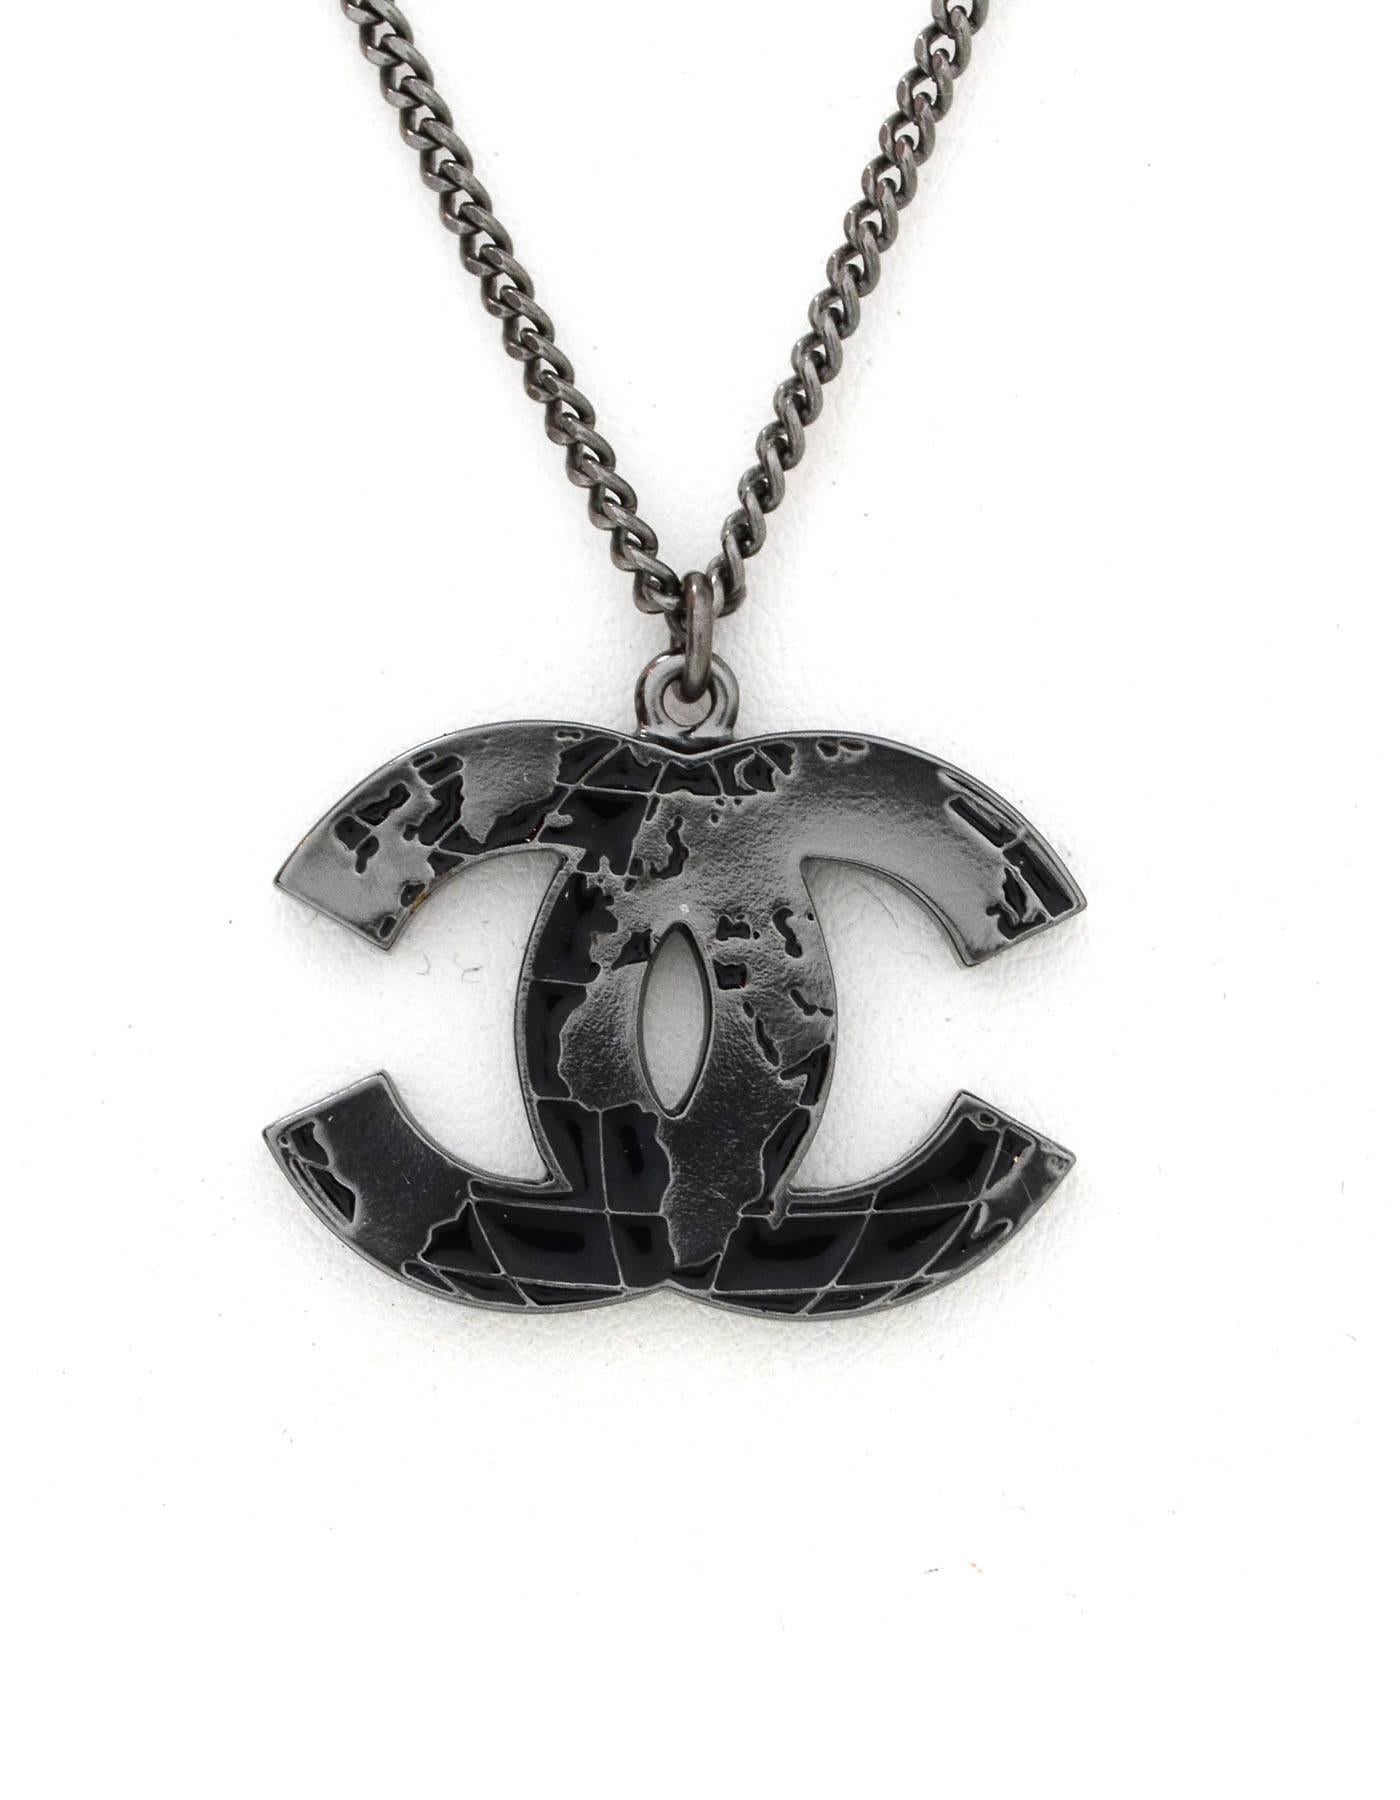 100% Authentic Chanel Gunmetal Globe CC Necklace. Features CC logo with a weathered black diamond-quilt pattern. Excellent pre-owned condition. Two jump rings allow necklace Can be worn short or long.

Made In: France
Year of Production: 2013
Color: